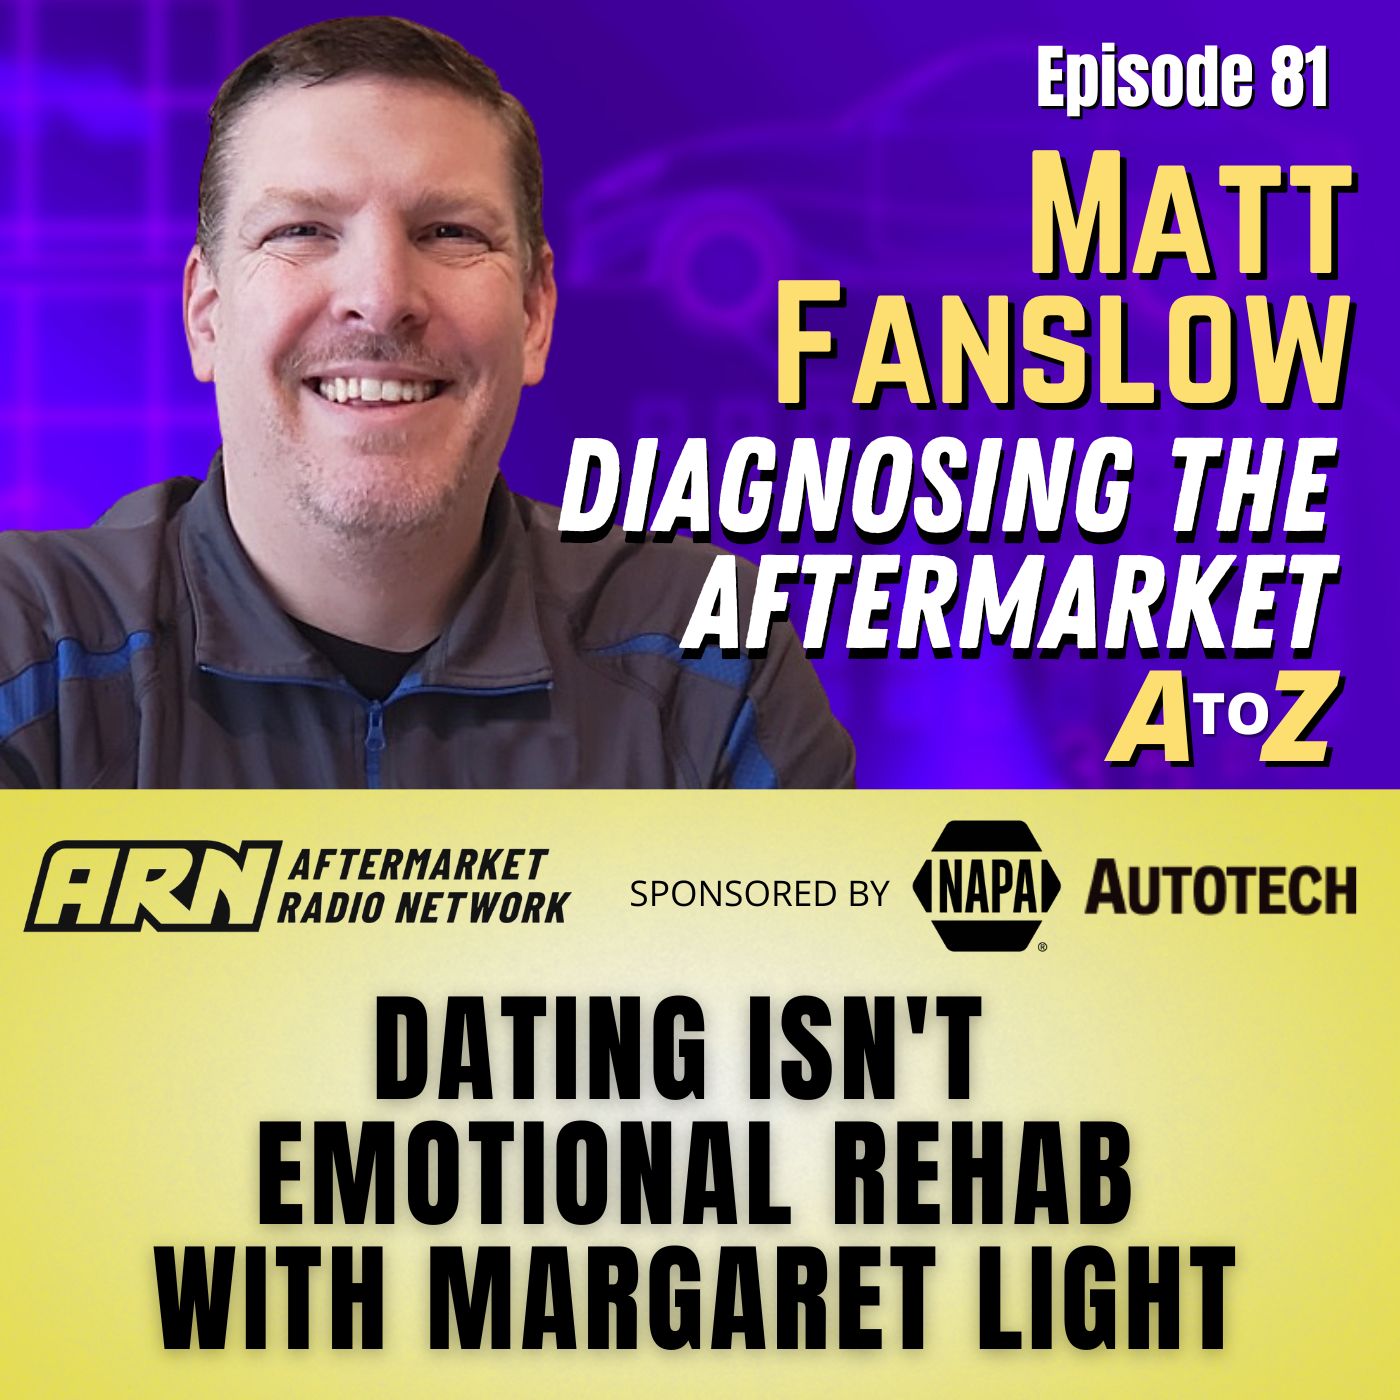 Artwork for podcast Diagnosing the Aftermarket A to Z